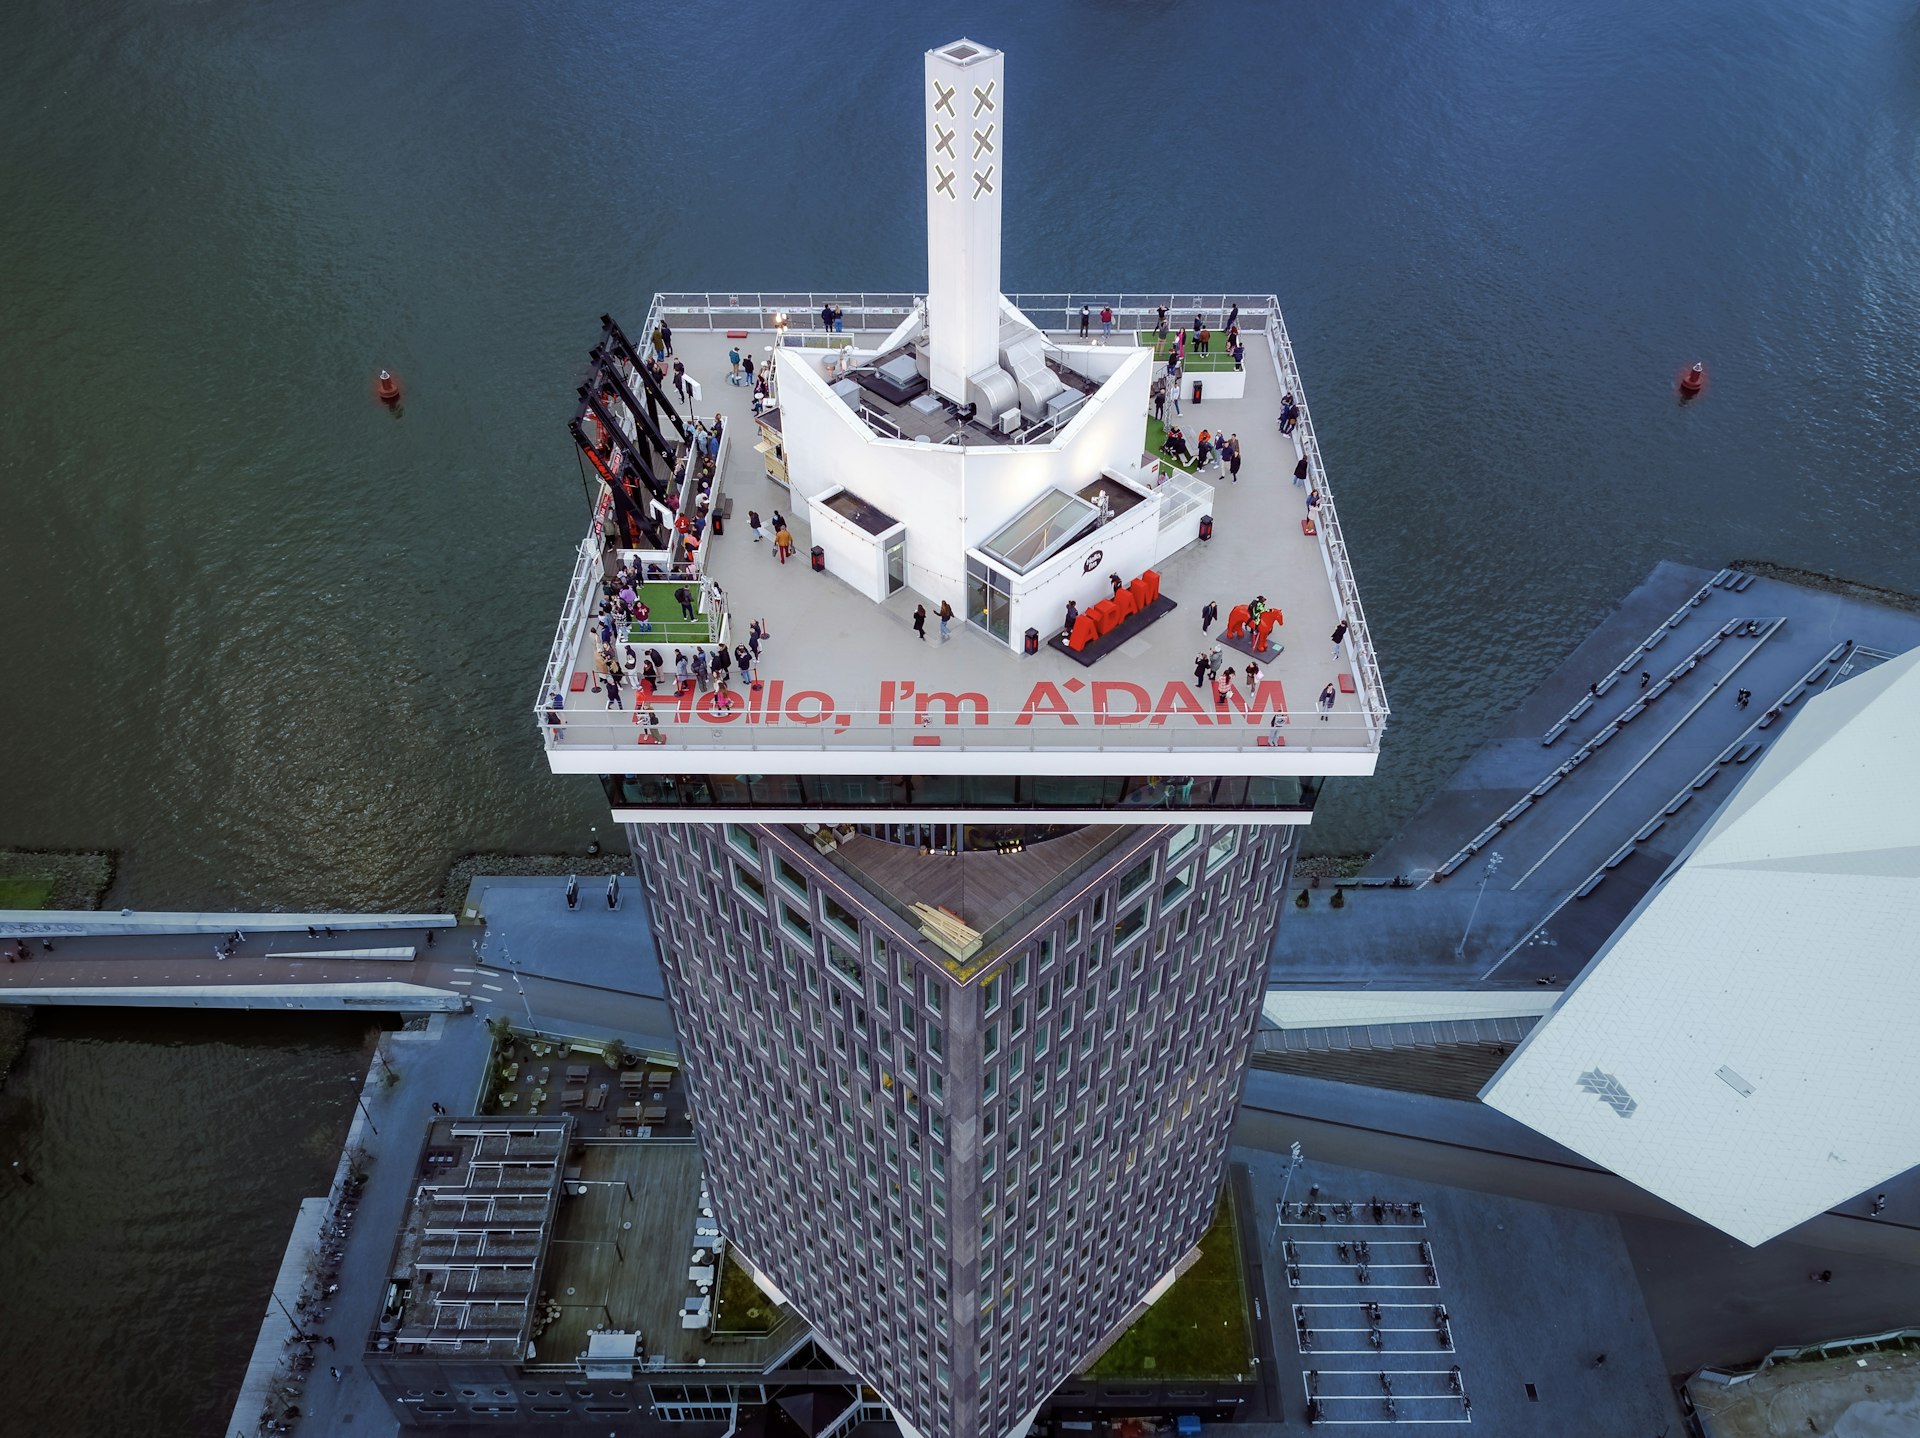 The top of the 22-story A’DAM Tower seen from above, Amsterdam, the Netherlands